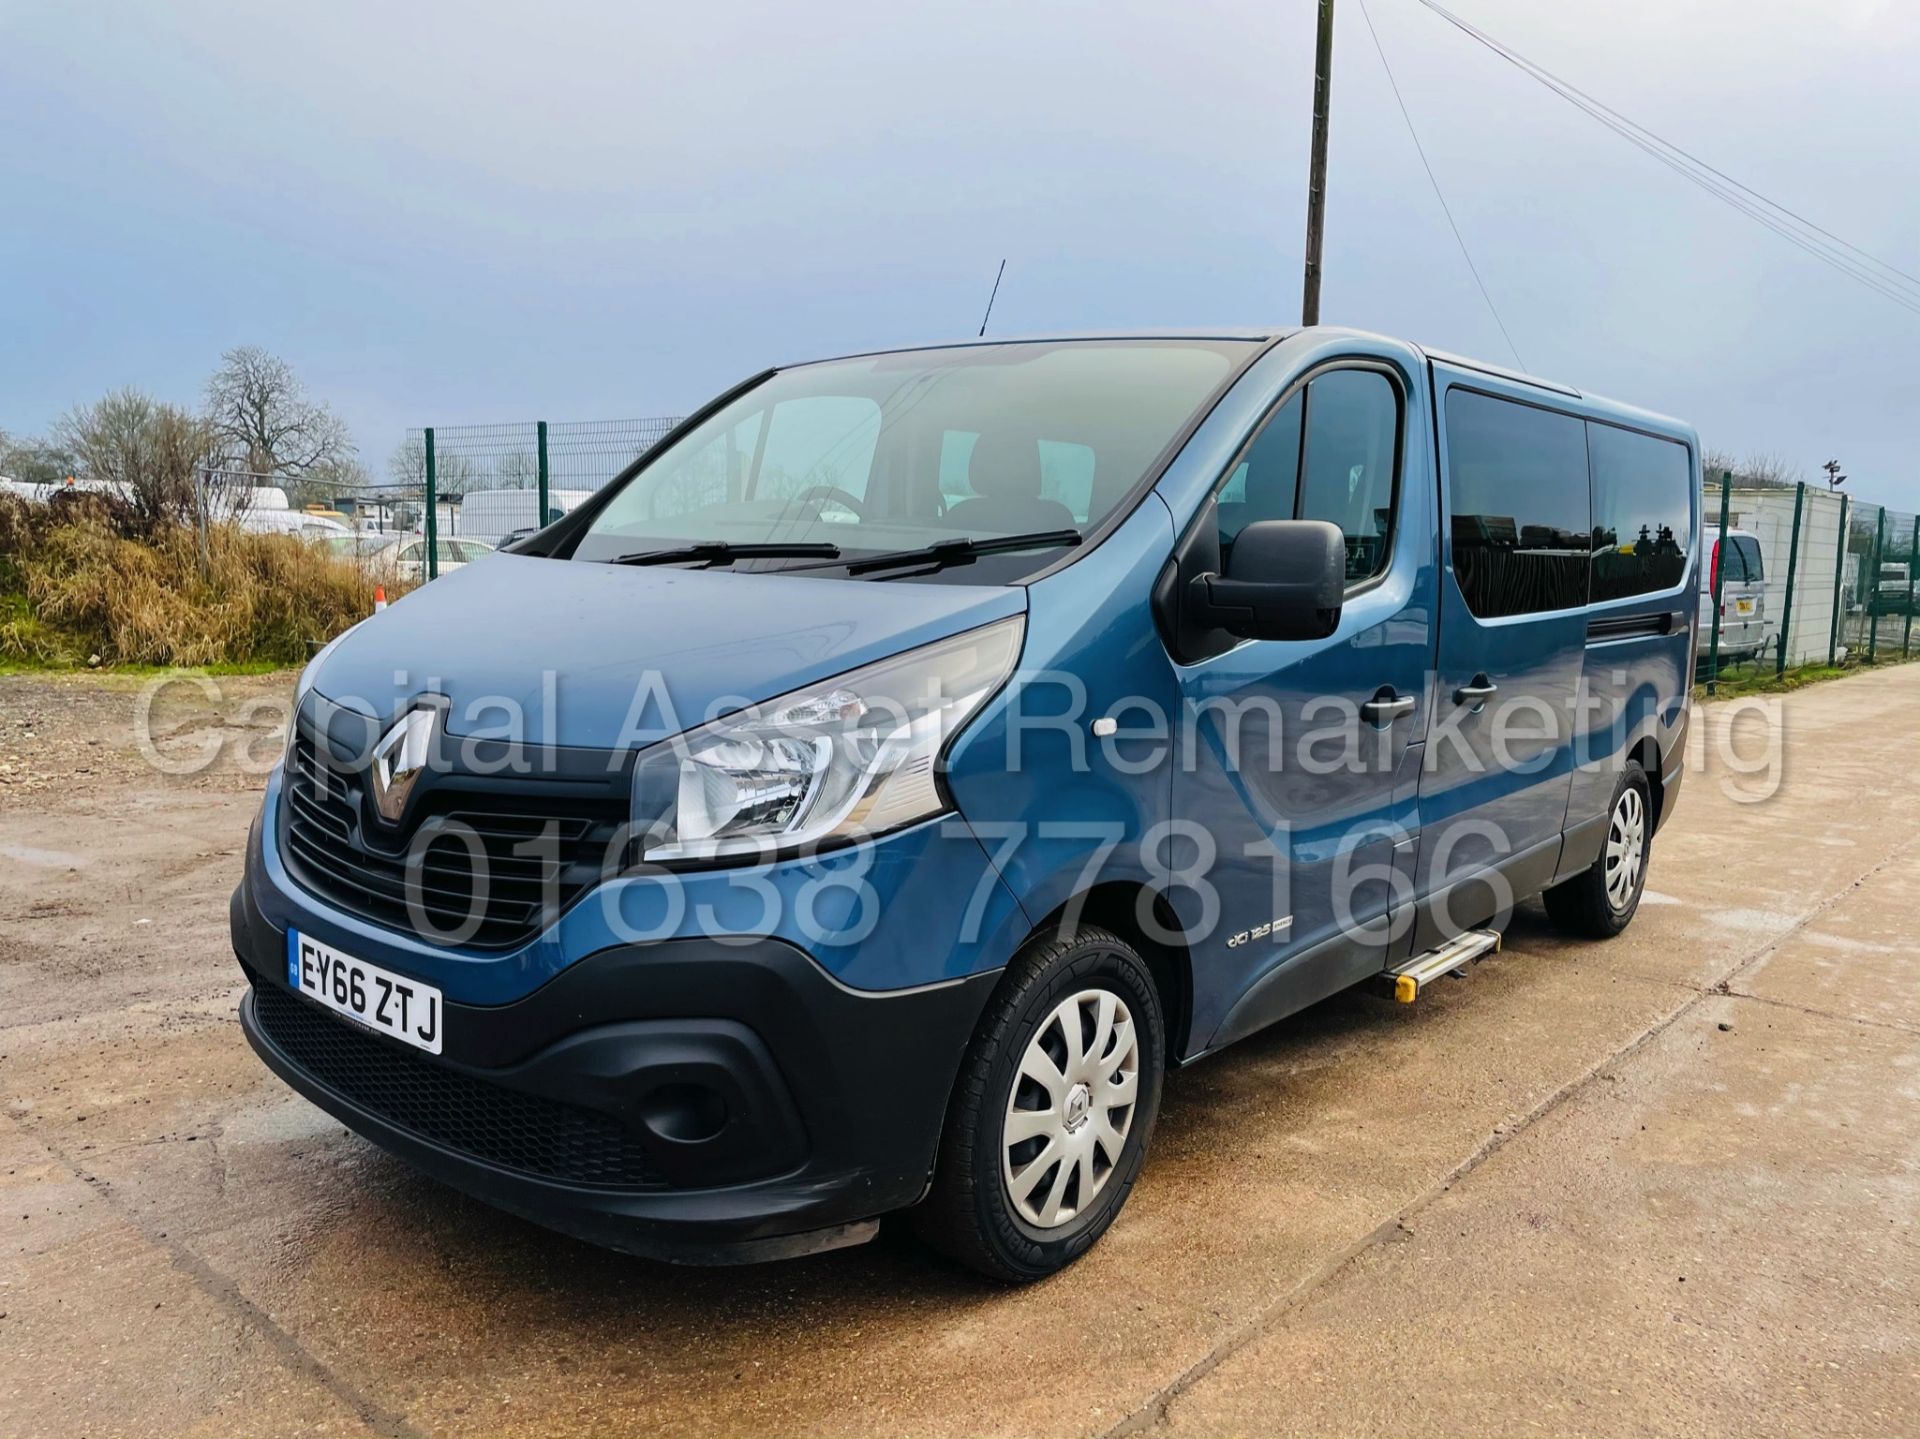 (ON SALE) RENAULT TRAFIC *LWB - 9 SEATER BUS* (2017 - EURO 6) '1.6 DCI - 6 SPEED' *AIR CON* (NO VAT) - Image 2 of 47